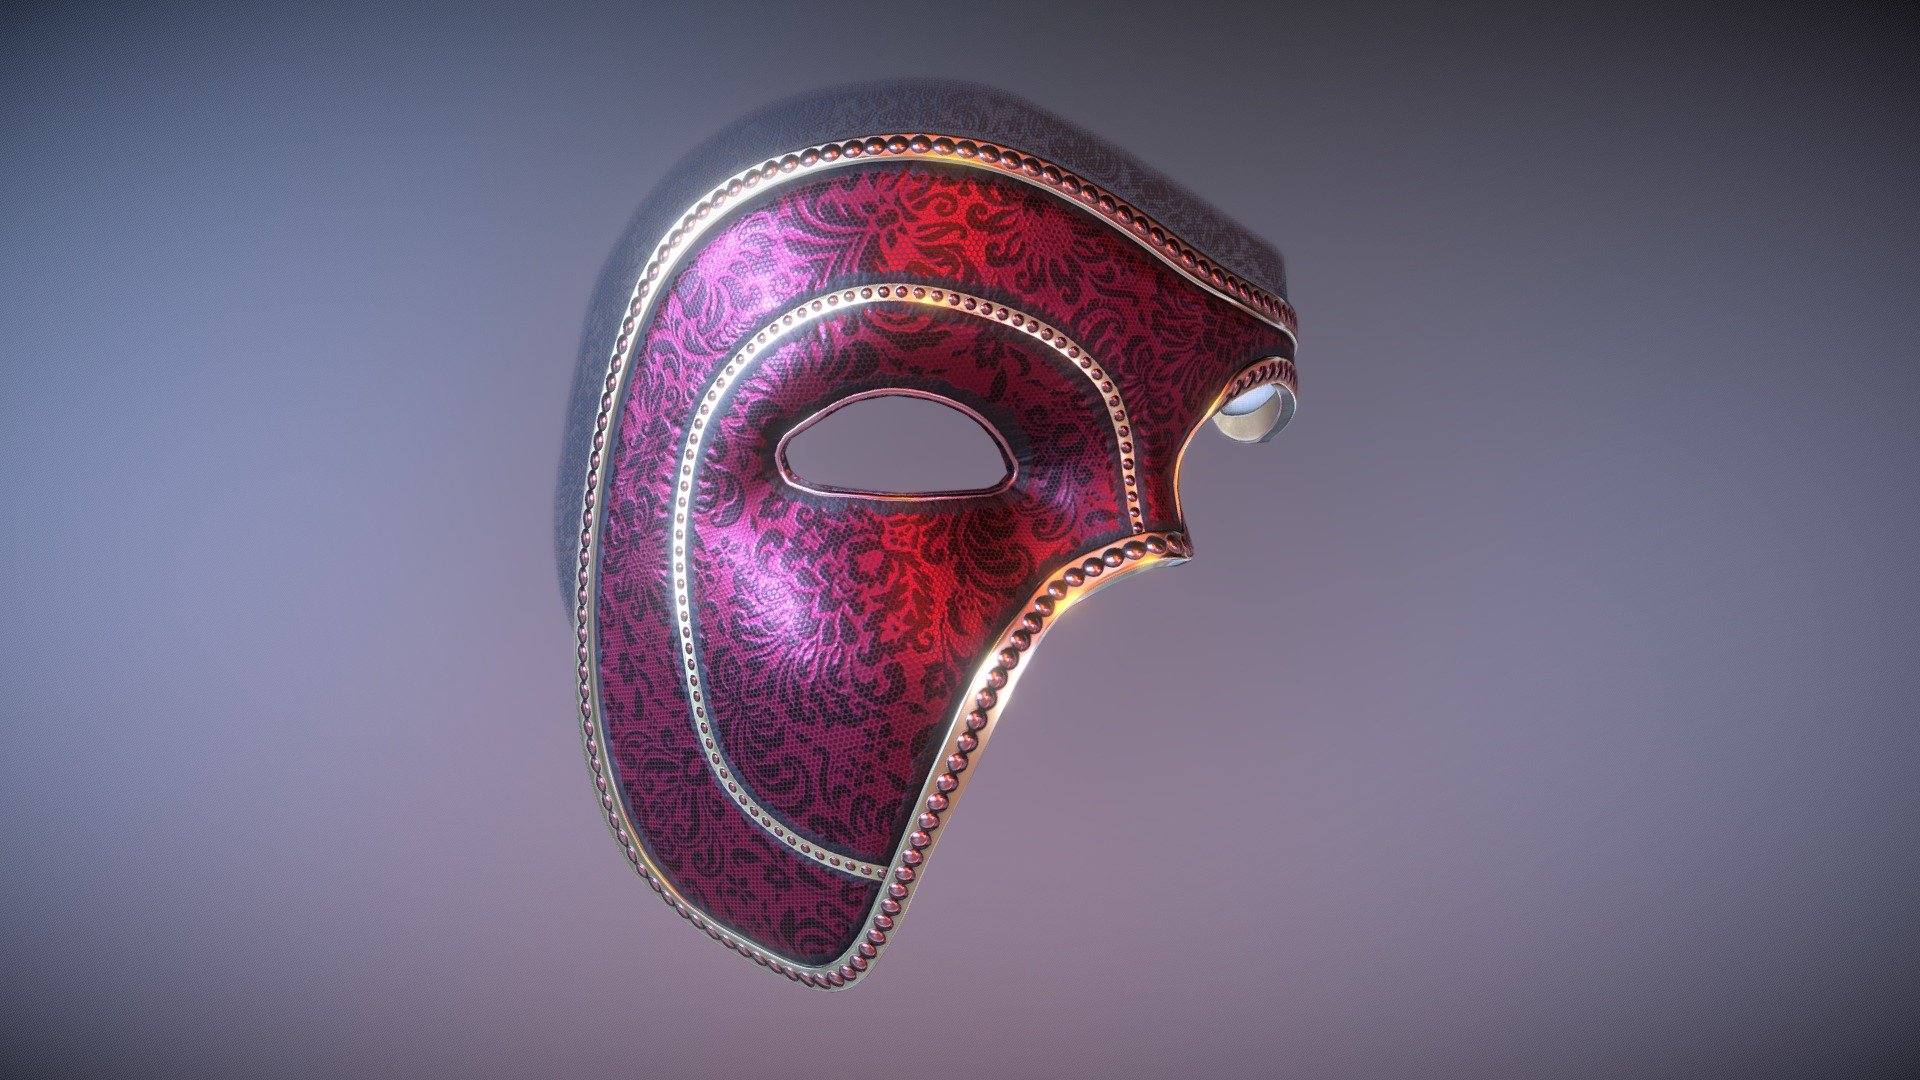 Masquerade Mask



All Textures created in Substance Painter and exported in .PNG PBR formats.

Includes textures for rough/met and gloss/spec workflows.

Logically named objects, materials and textures.

Modelled in Blender 2.91

Textured in Substance Painter 2020.2.1.

modelled to real world scales.

Fully and efficiently UV unwrapped.

Game ready.

Tested in Marmoset Viewer, Marmoset Toolbag, EEVEE and Cycles.


Formats included



.Blend (Native)

.FBX

.OBJ

.DAE


Textures included in .png format.
Masquerade Mask - 2K




Base Colour (Metallic Colour)

Diffuse (Metallic Black)

Roughness

Glossiness

Specular

Metallic

Normal - (OpenGL Unity standard)

Normal - (DirectX Unreal Standard)

AO

Opacity


Poly Counts not including head mesh (According to Blender inspection tools).



Face count: 3,130

Vert count: 3,175

Edges: 6,304

Triangulated count: 6,256
 - Masquerade Mask - Buy Royalty Free 3D model by PBR3D 3d model